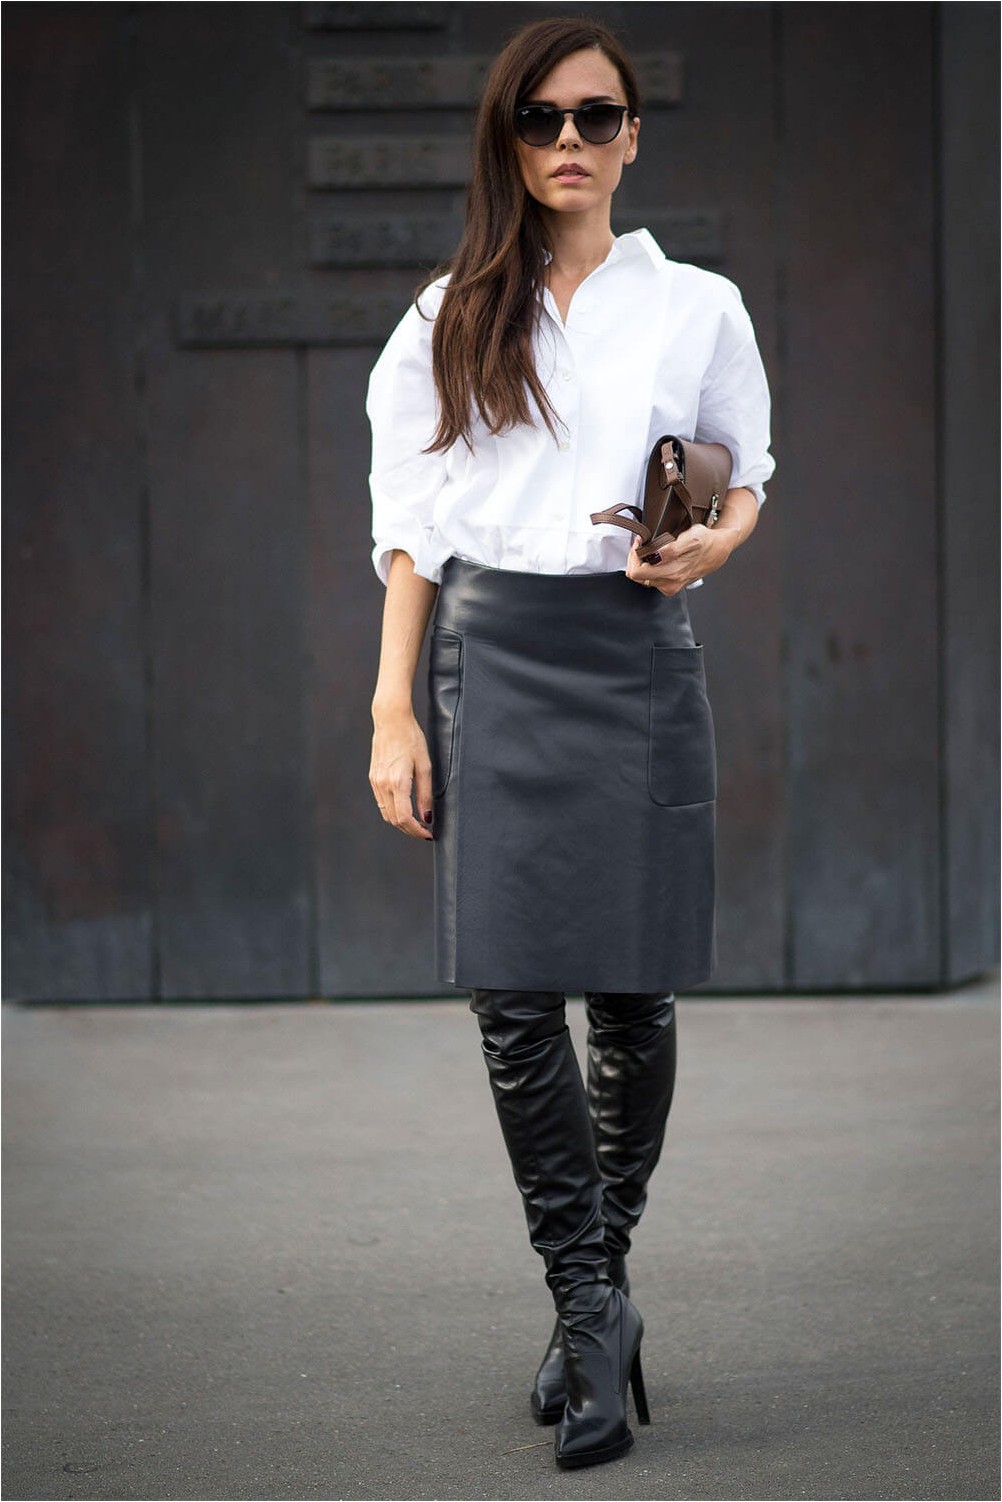 Pencil skirt with boots